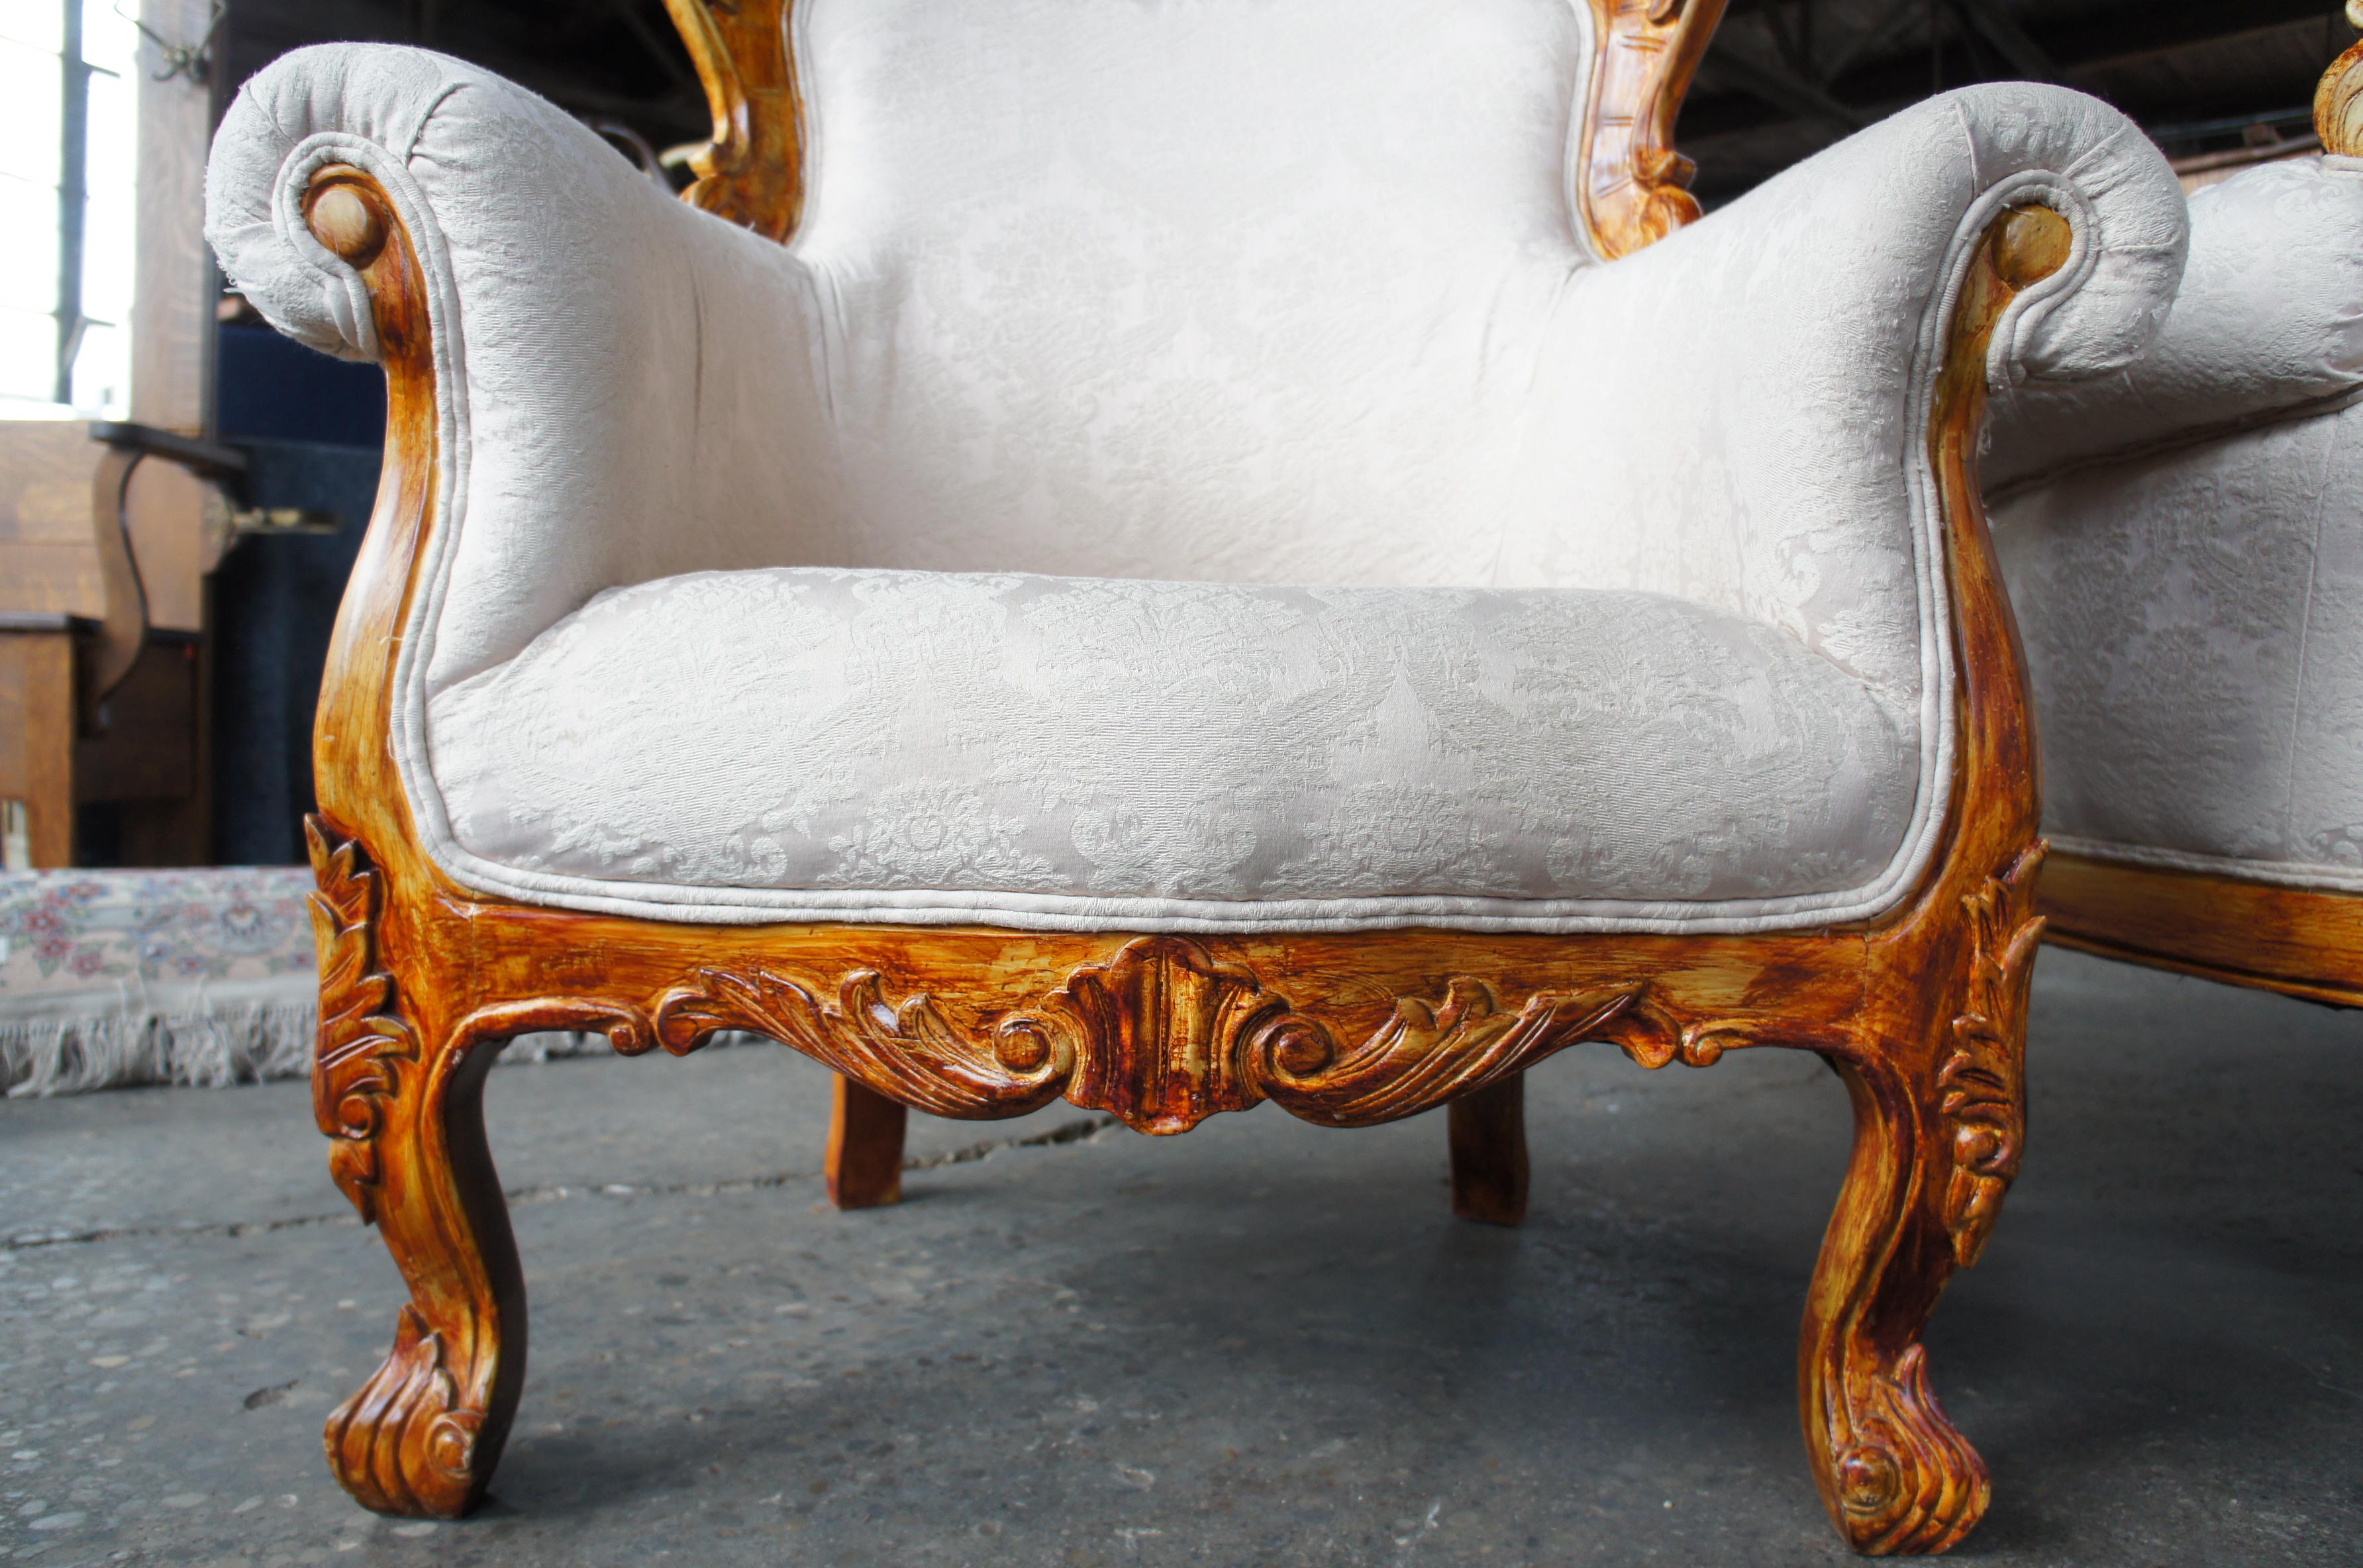 20th Century Antiqued Baroque Rococo High Relief Carved Club Chairs Continental Brocade Seat